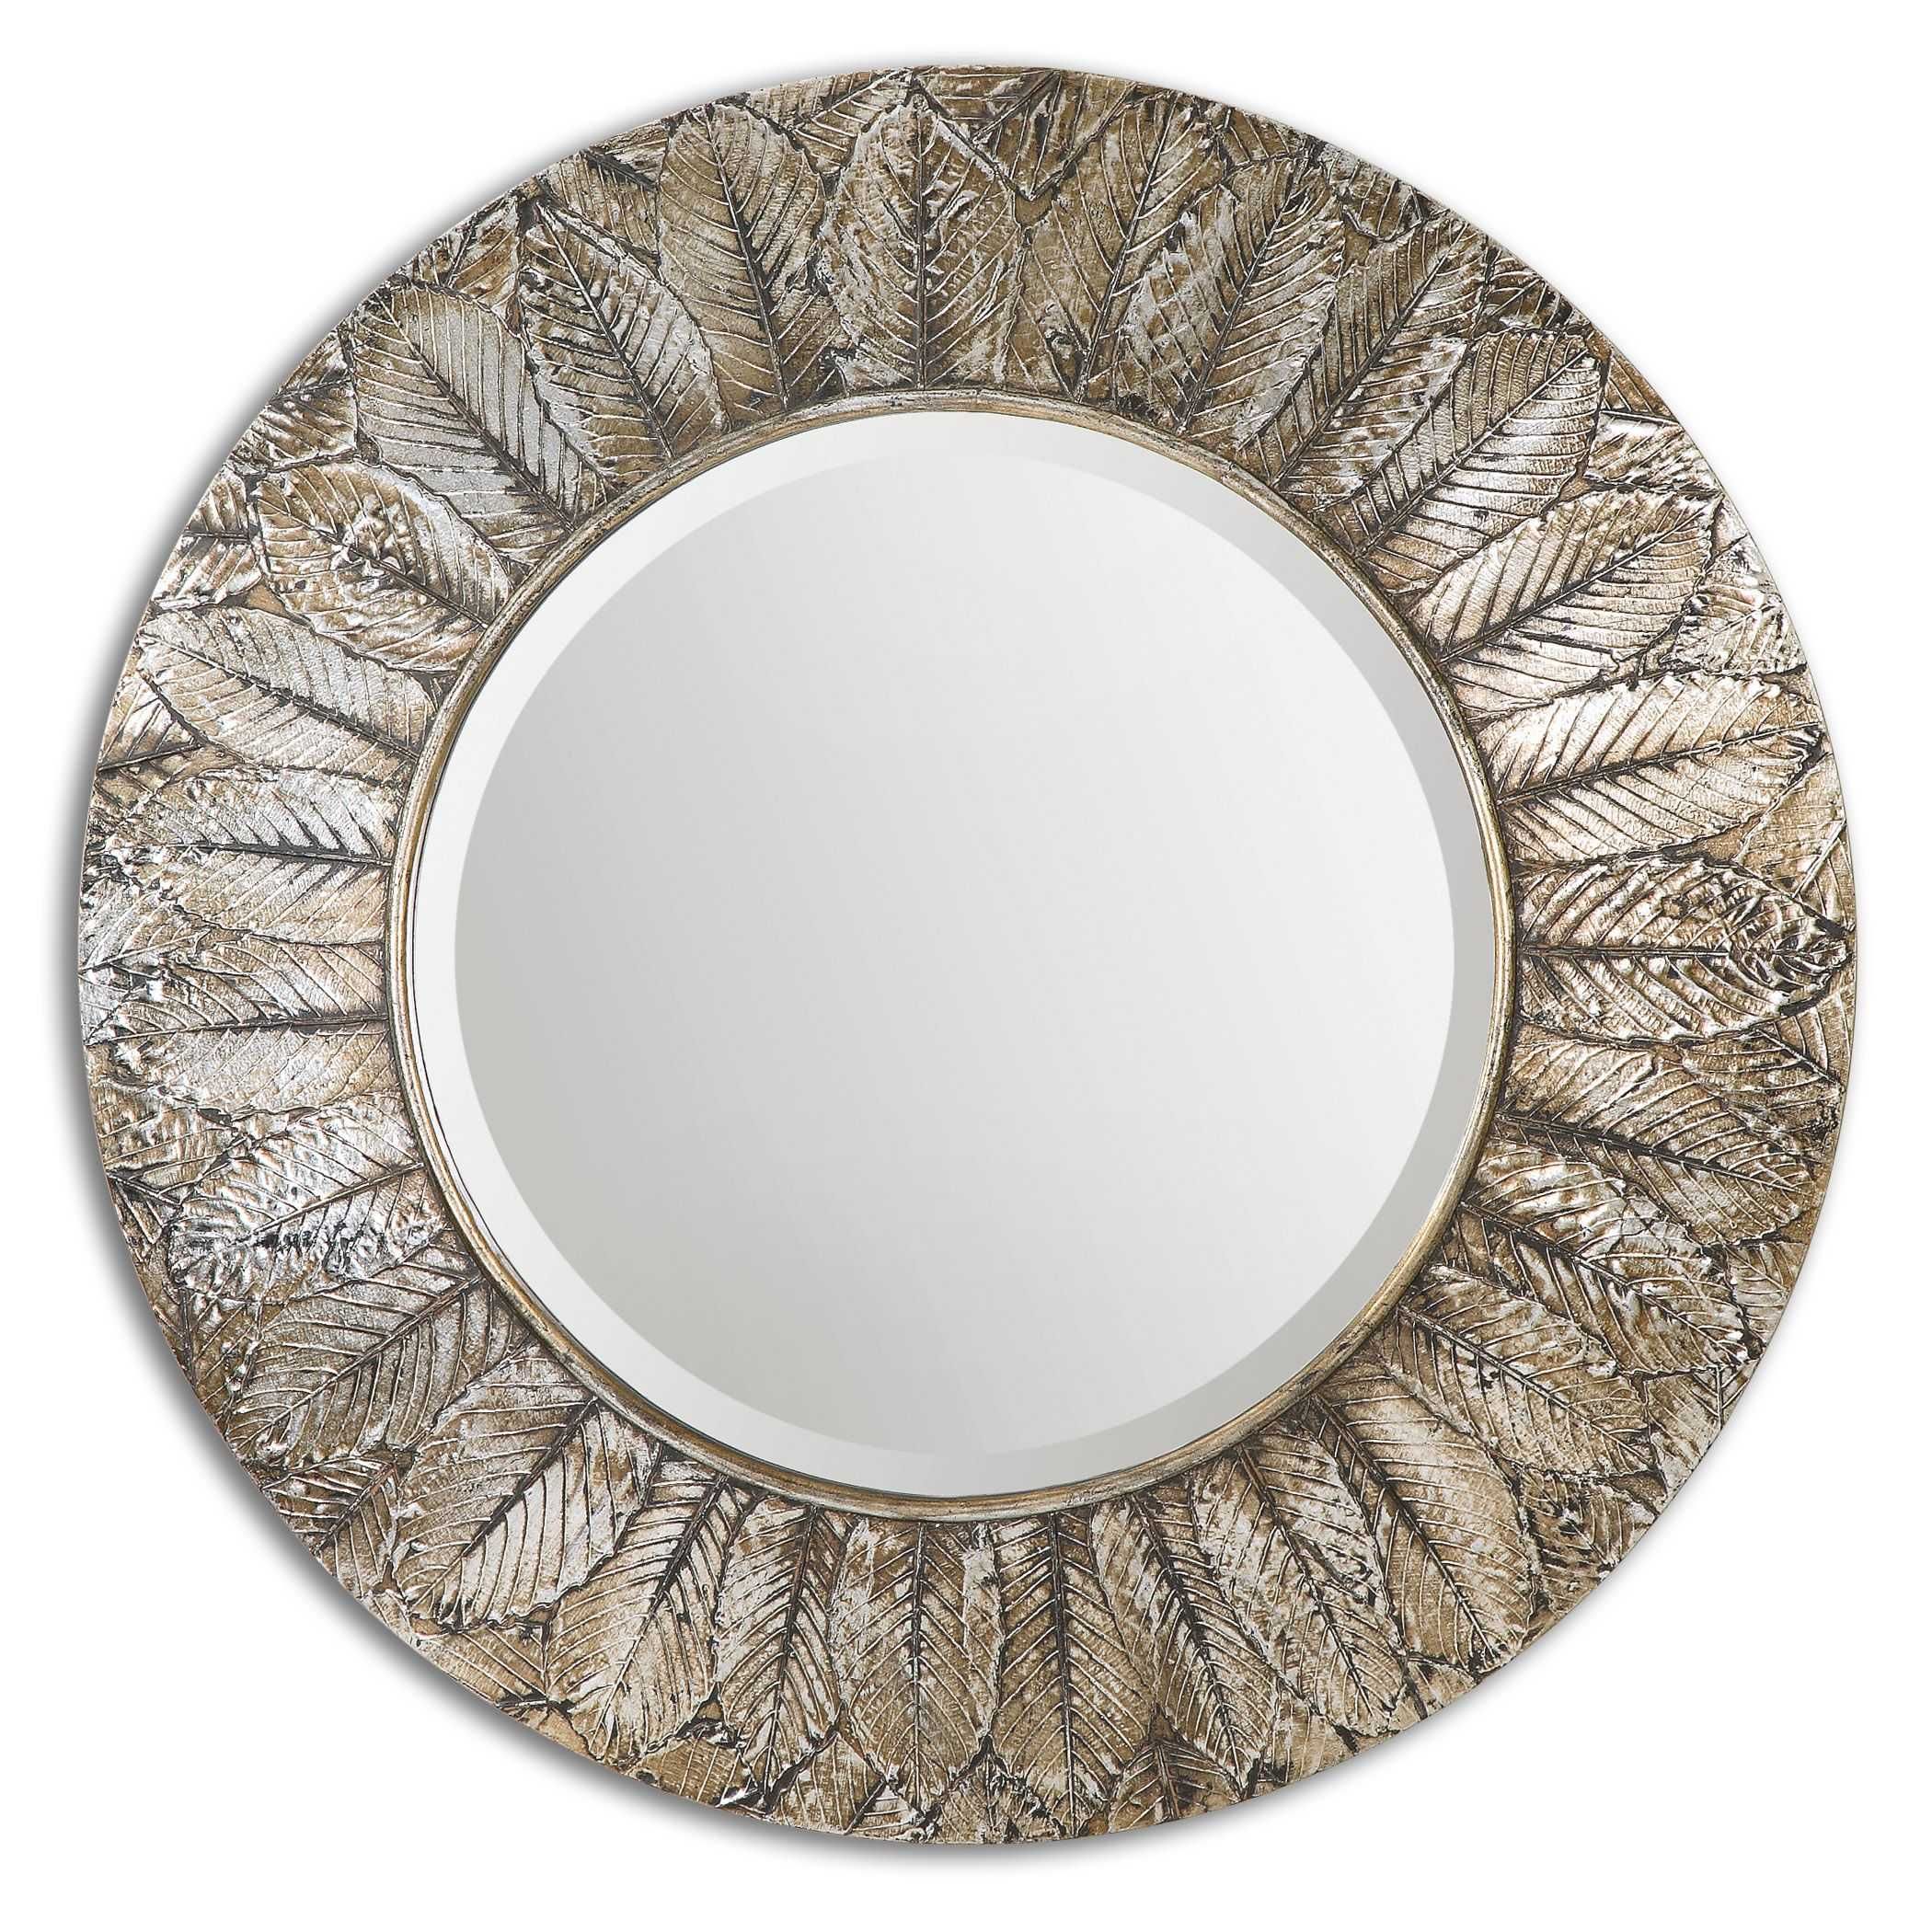 Uttermost Foliage Round Silver Leaf Mirror Inside Silver Leaf Round Wall Mirrors (View 2 of 15)